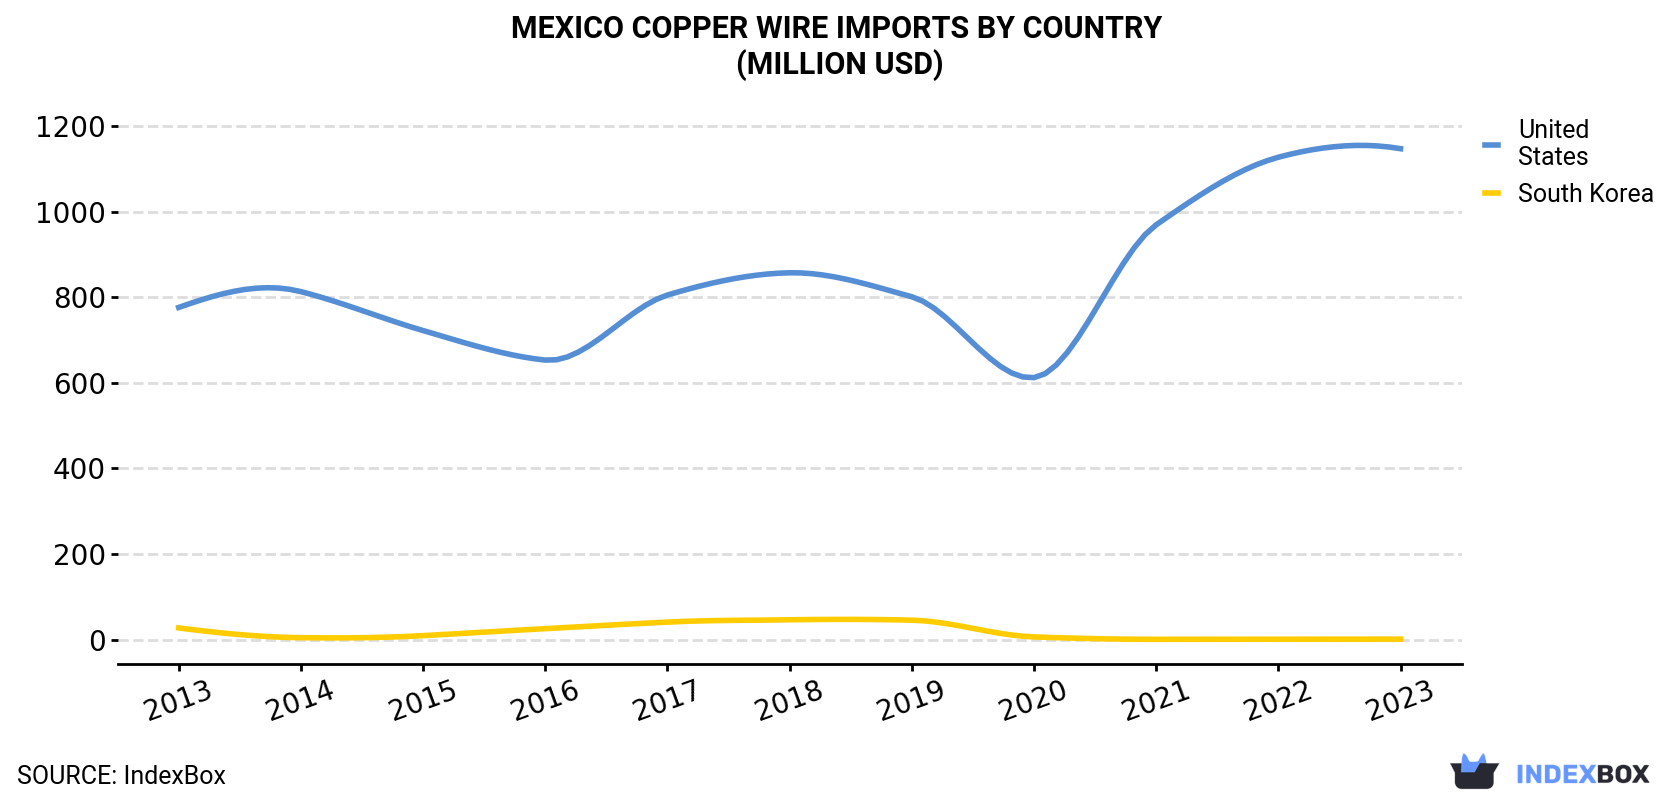 Mexico Copper Wire Imports By Country (Million USD)